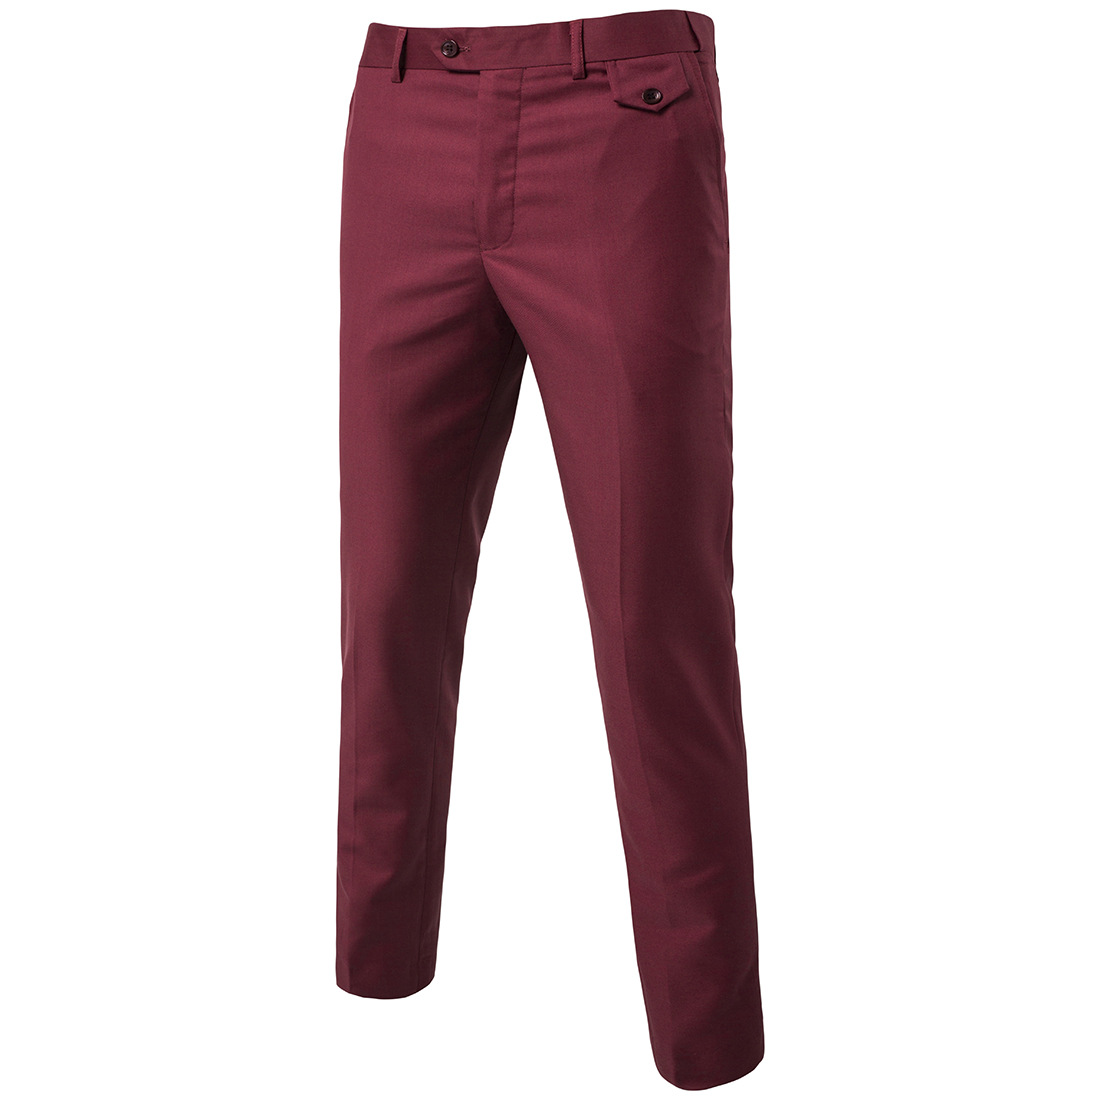 Men Suit Pants Cotton Solid Casual Business Formal Bridegroom Plus Size Wedding Trousers wine red